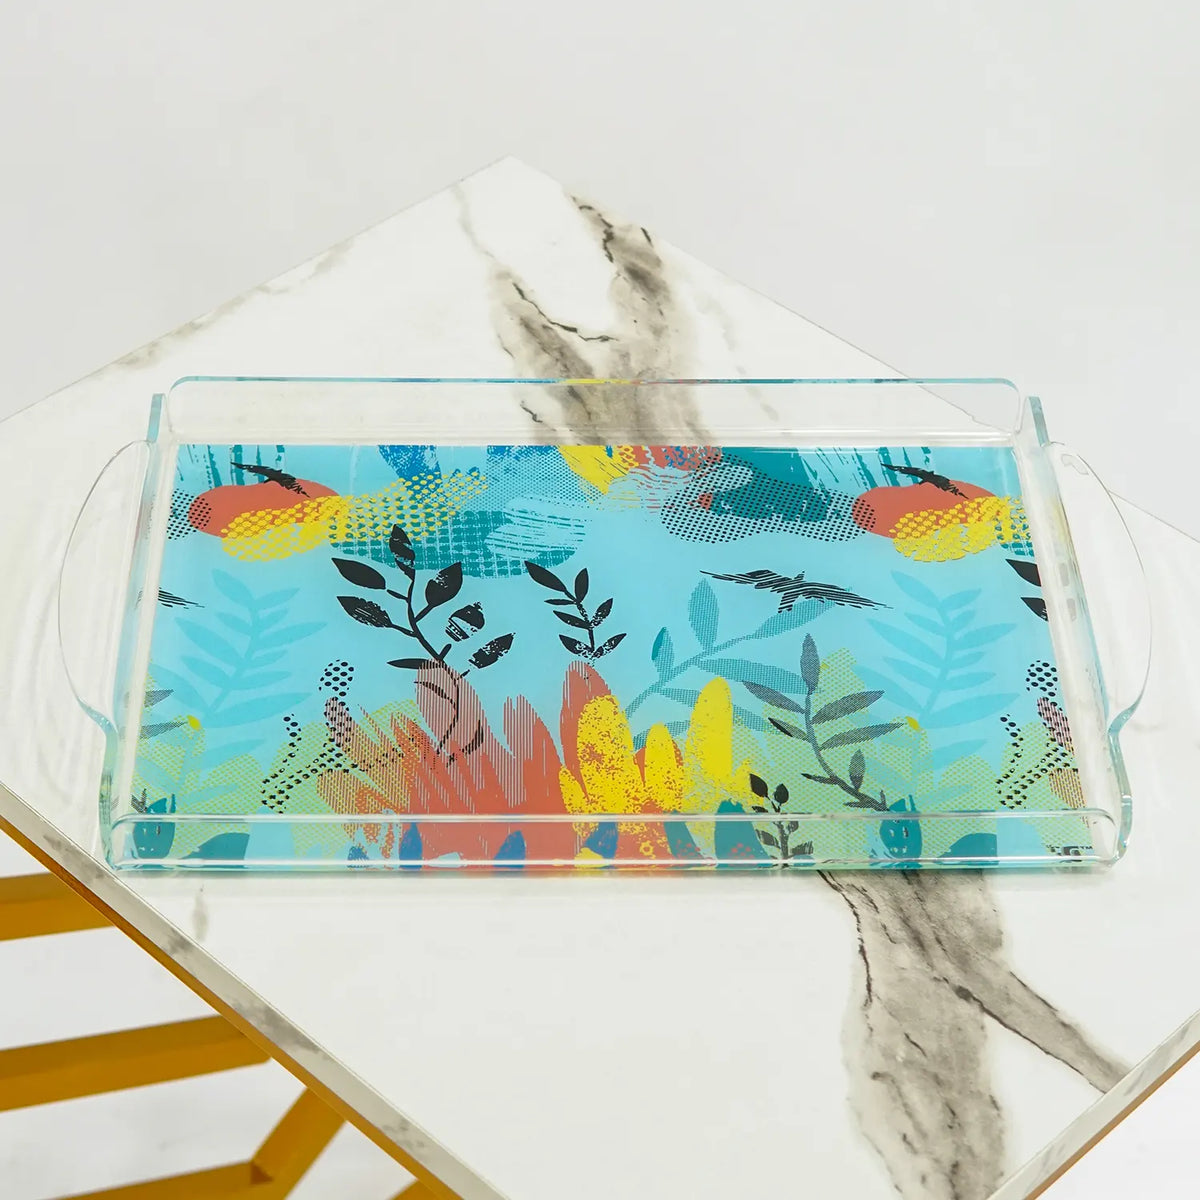 Elegance in Glass: High-Quality Tray with Beautiful Floral Design